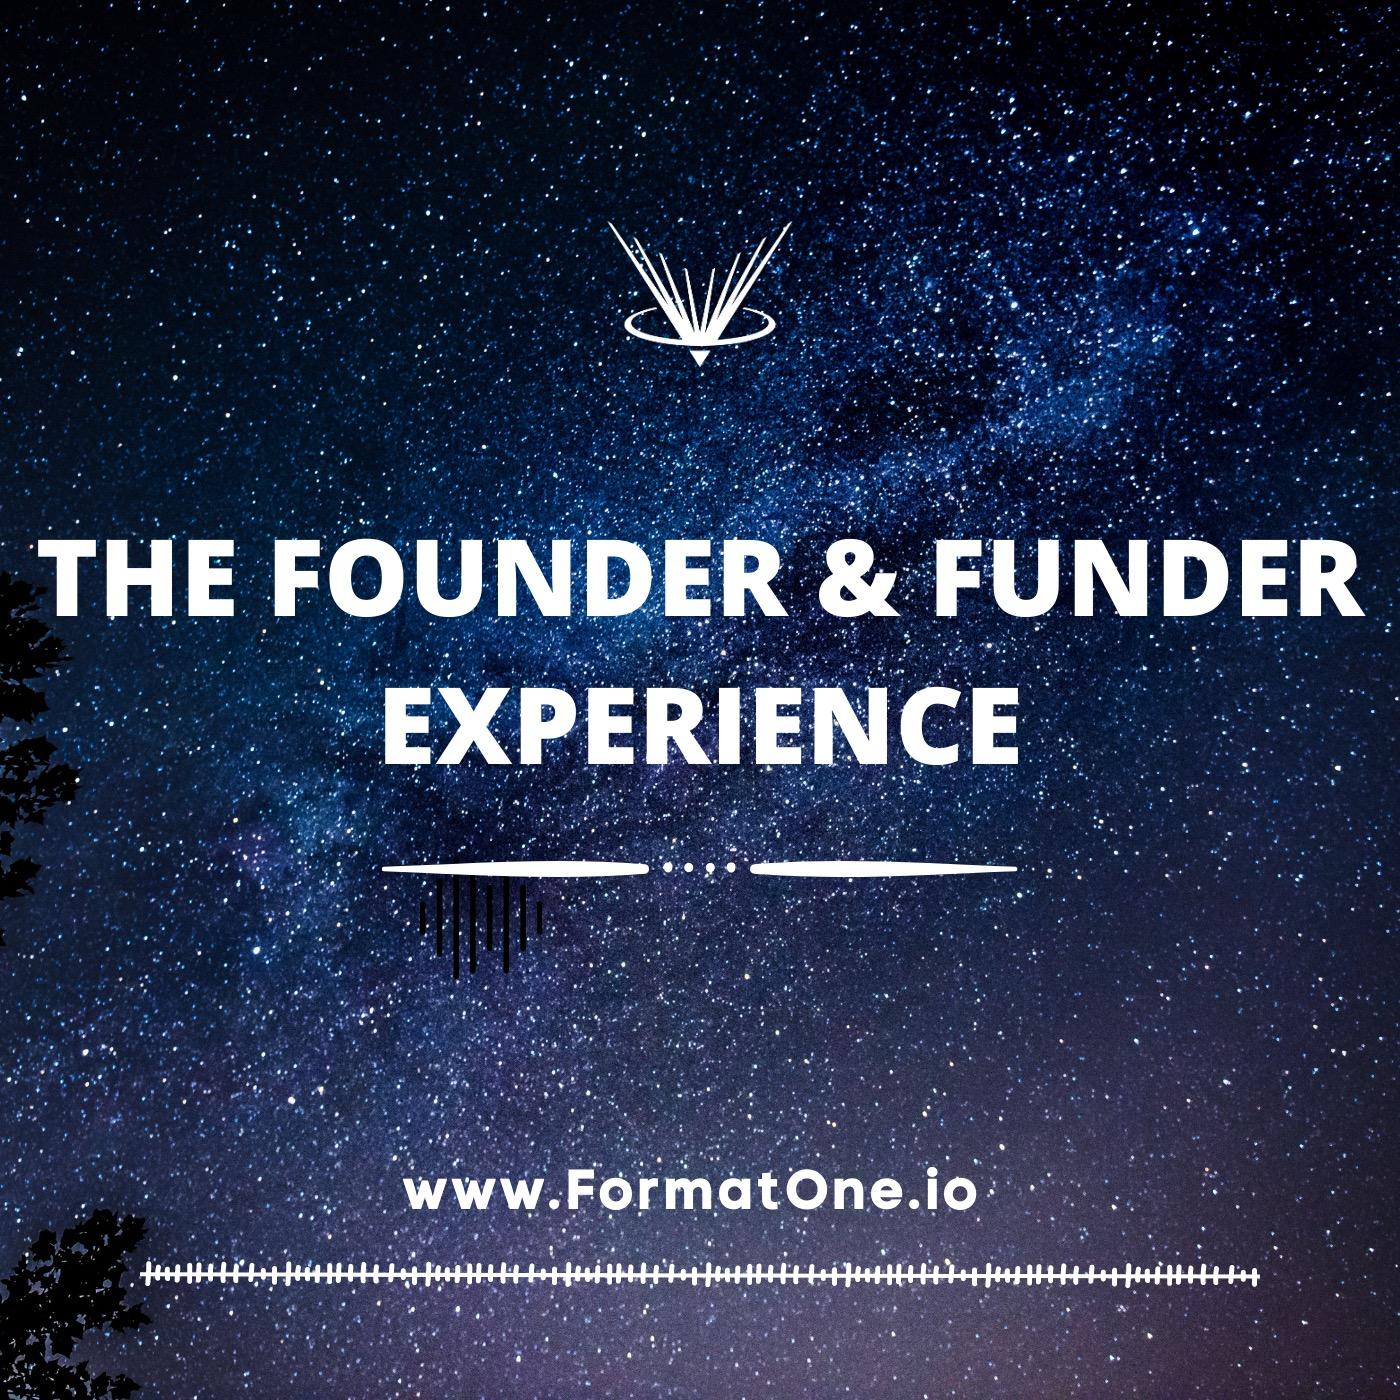 Founder & Funder Experience